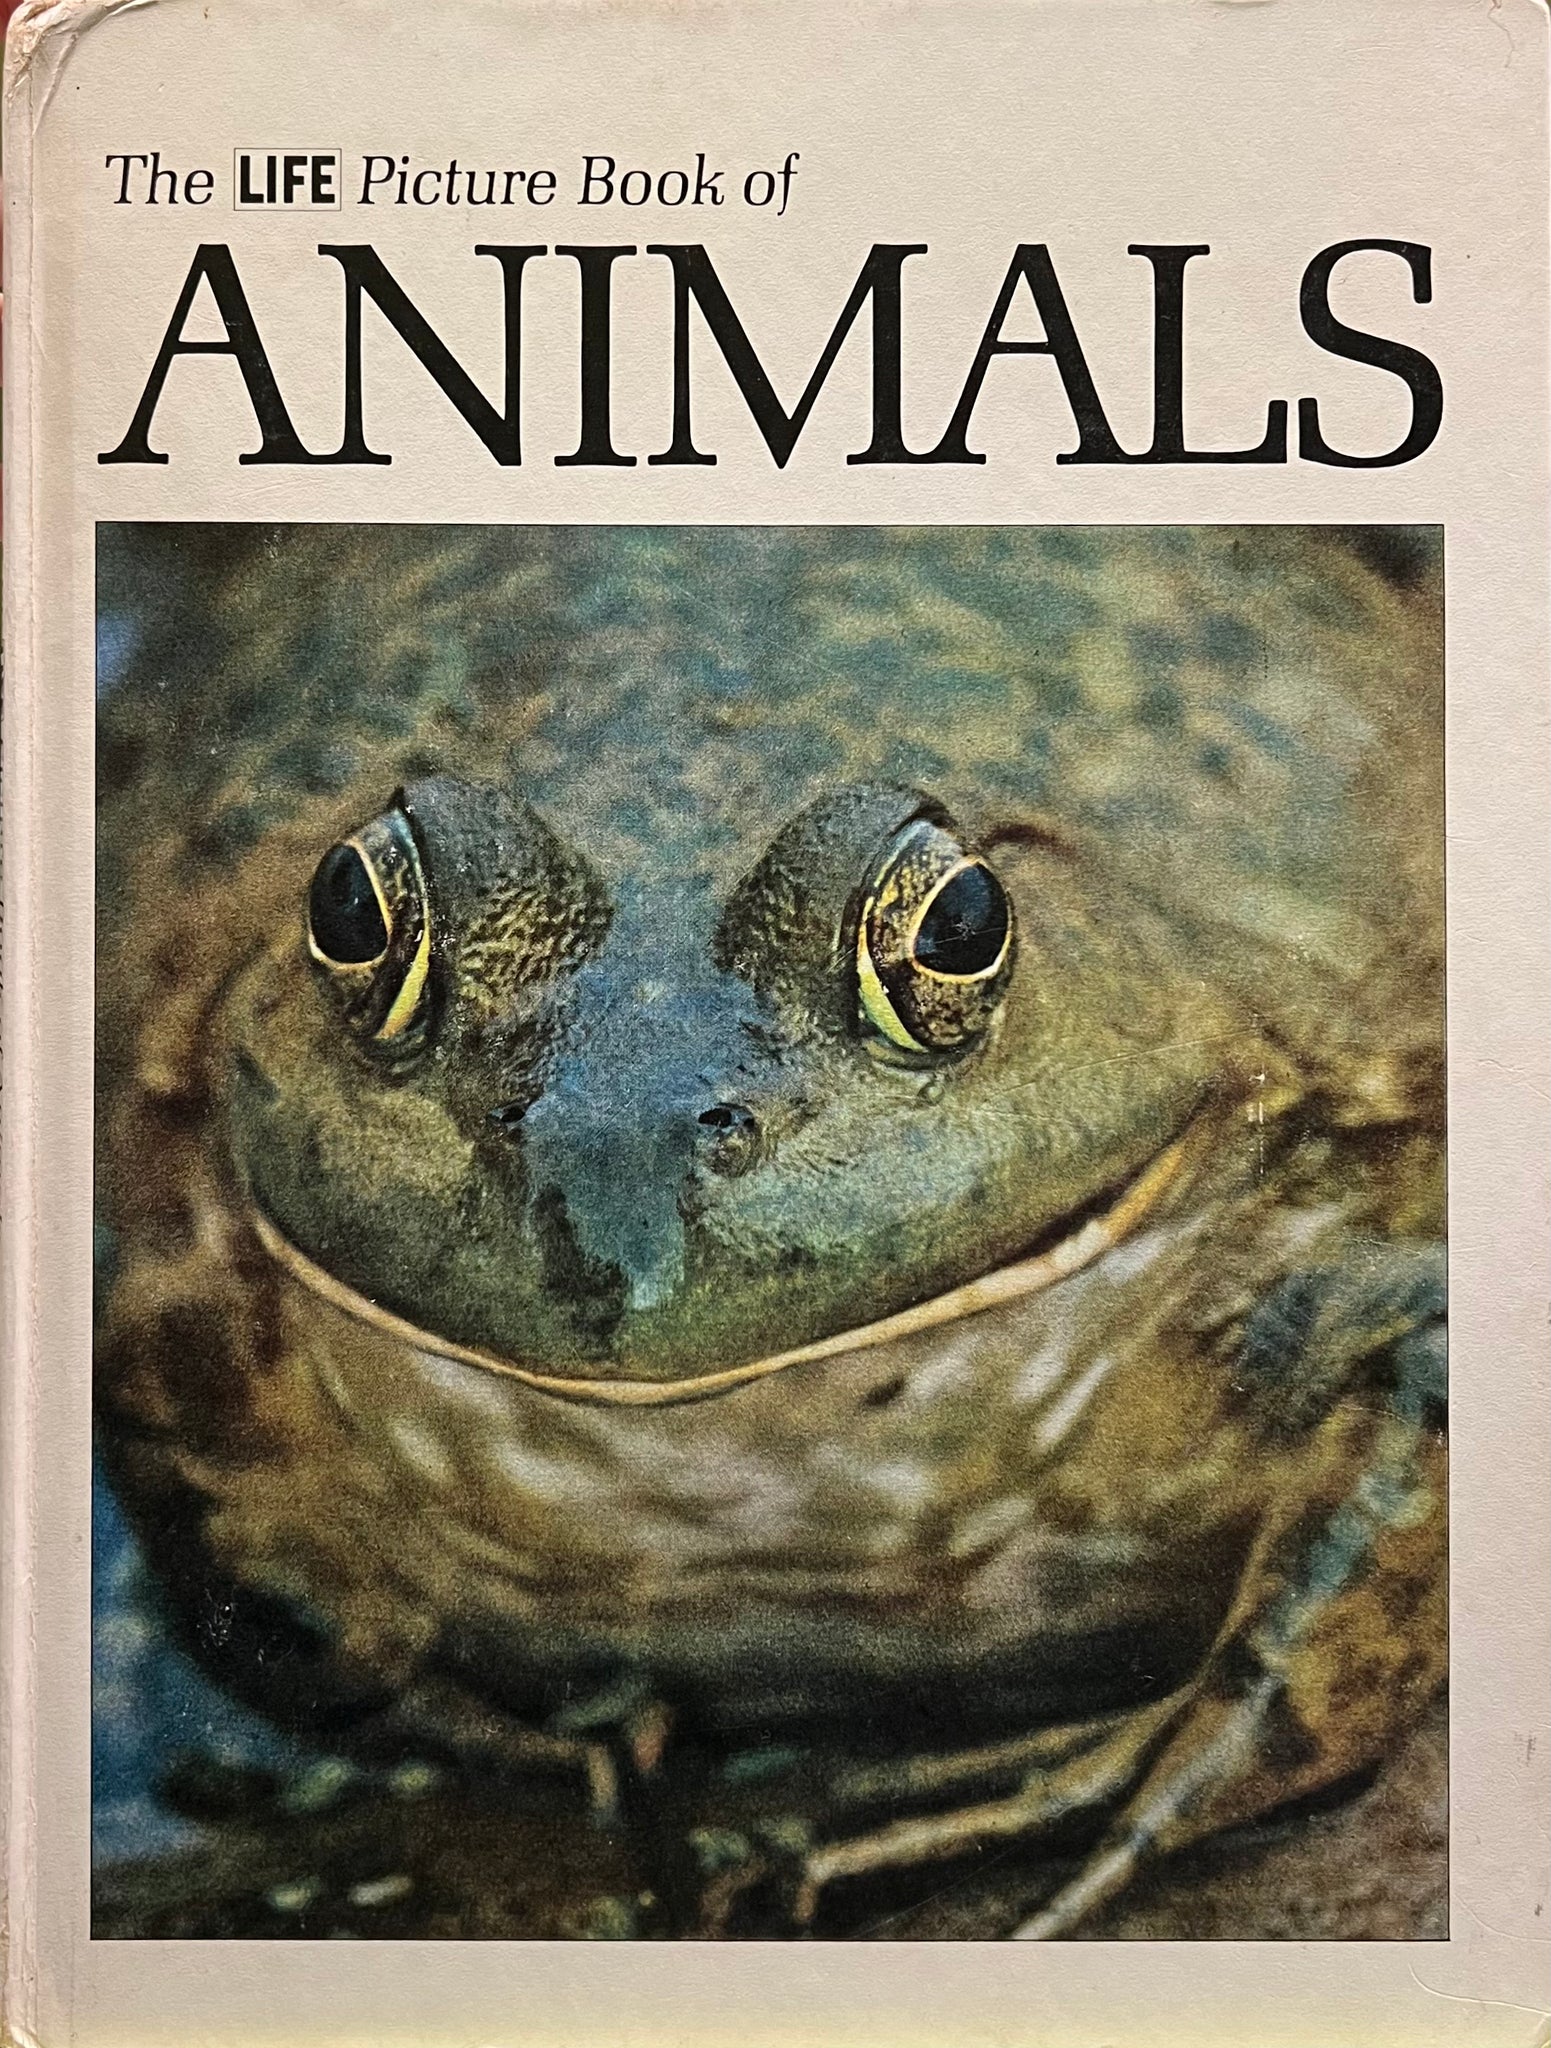 The Life Picture Book of Animals